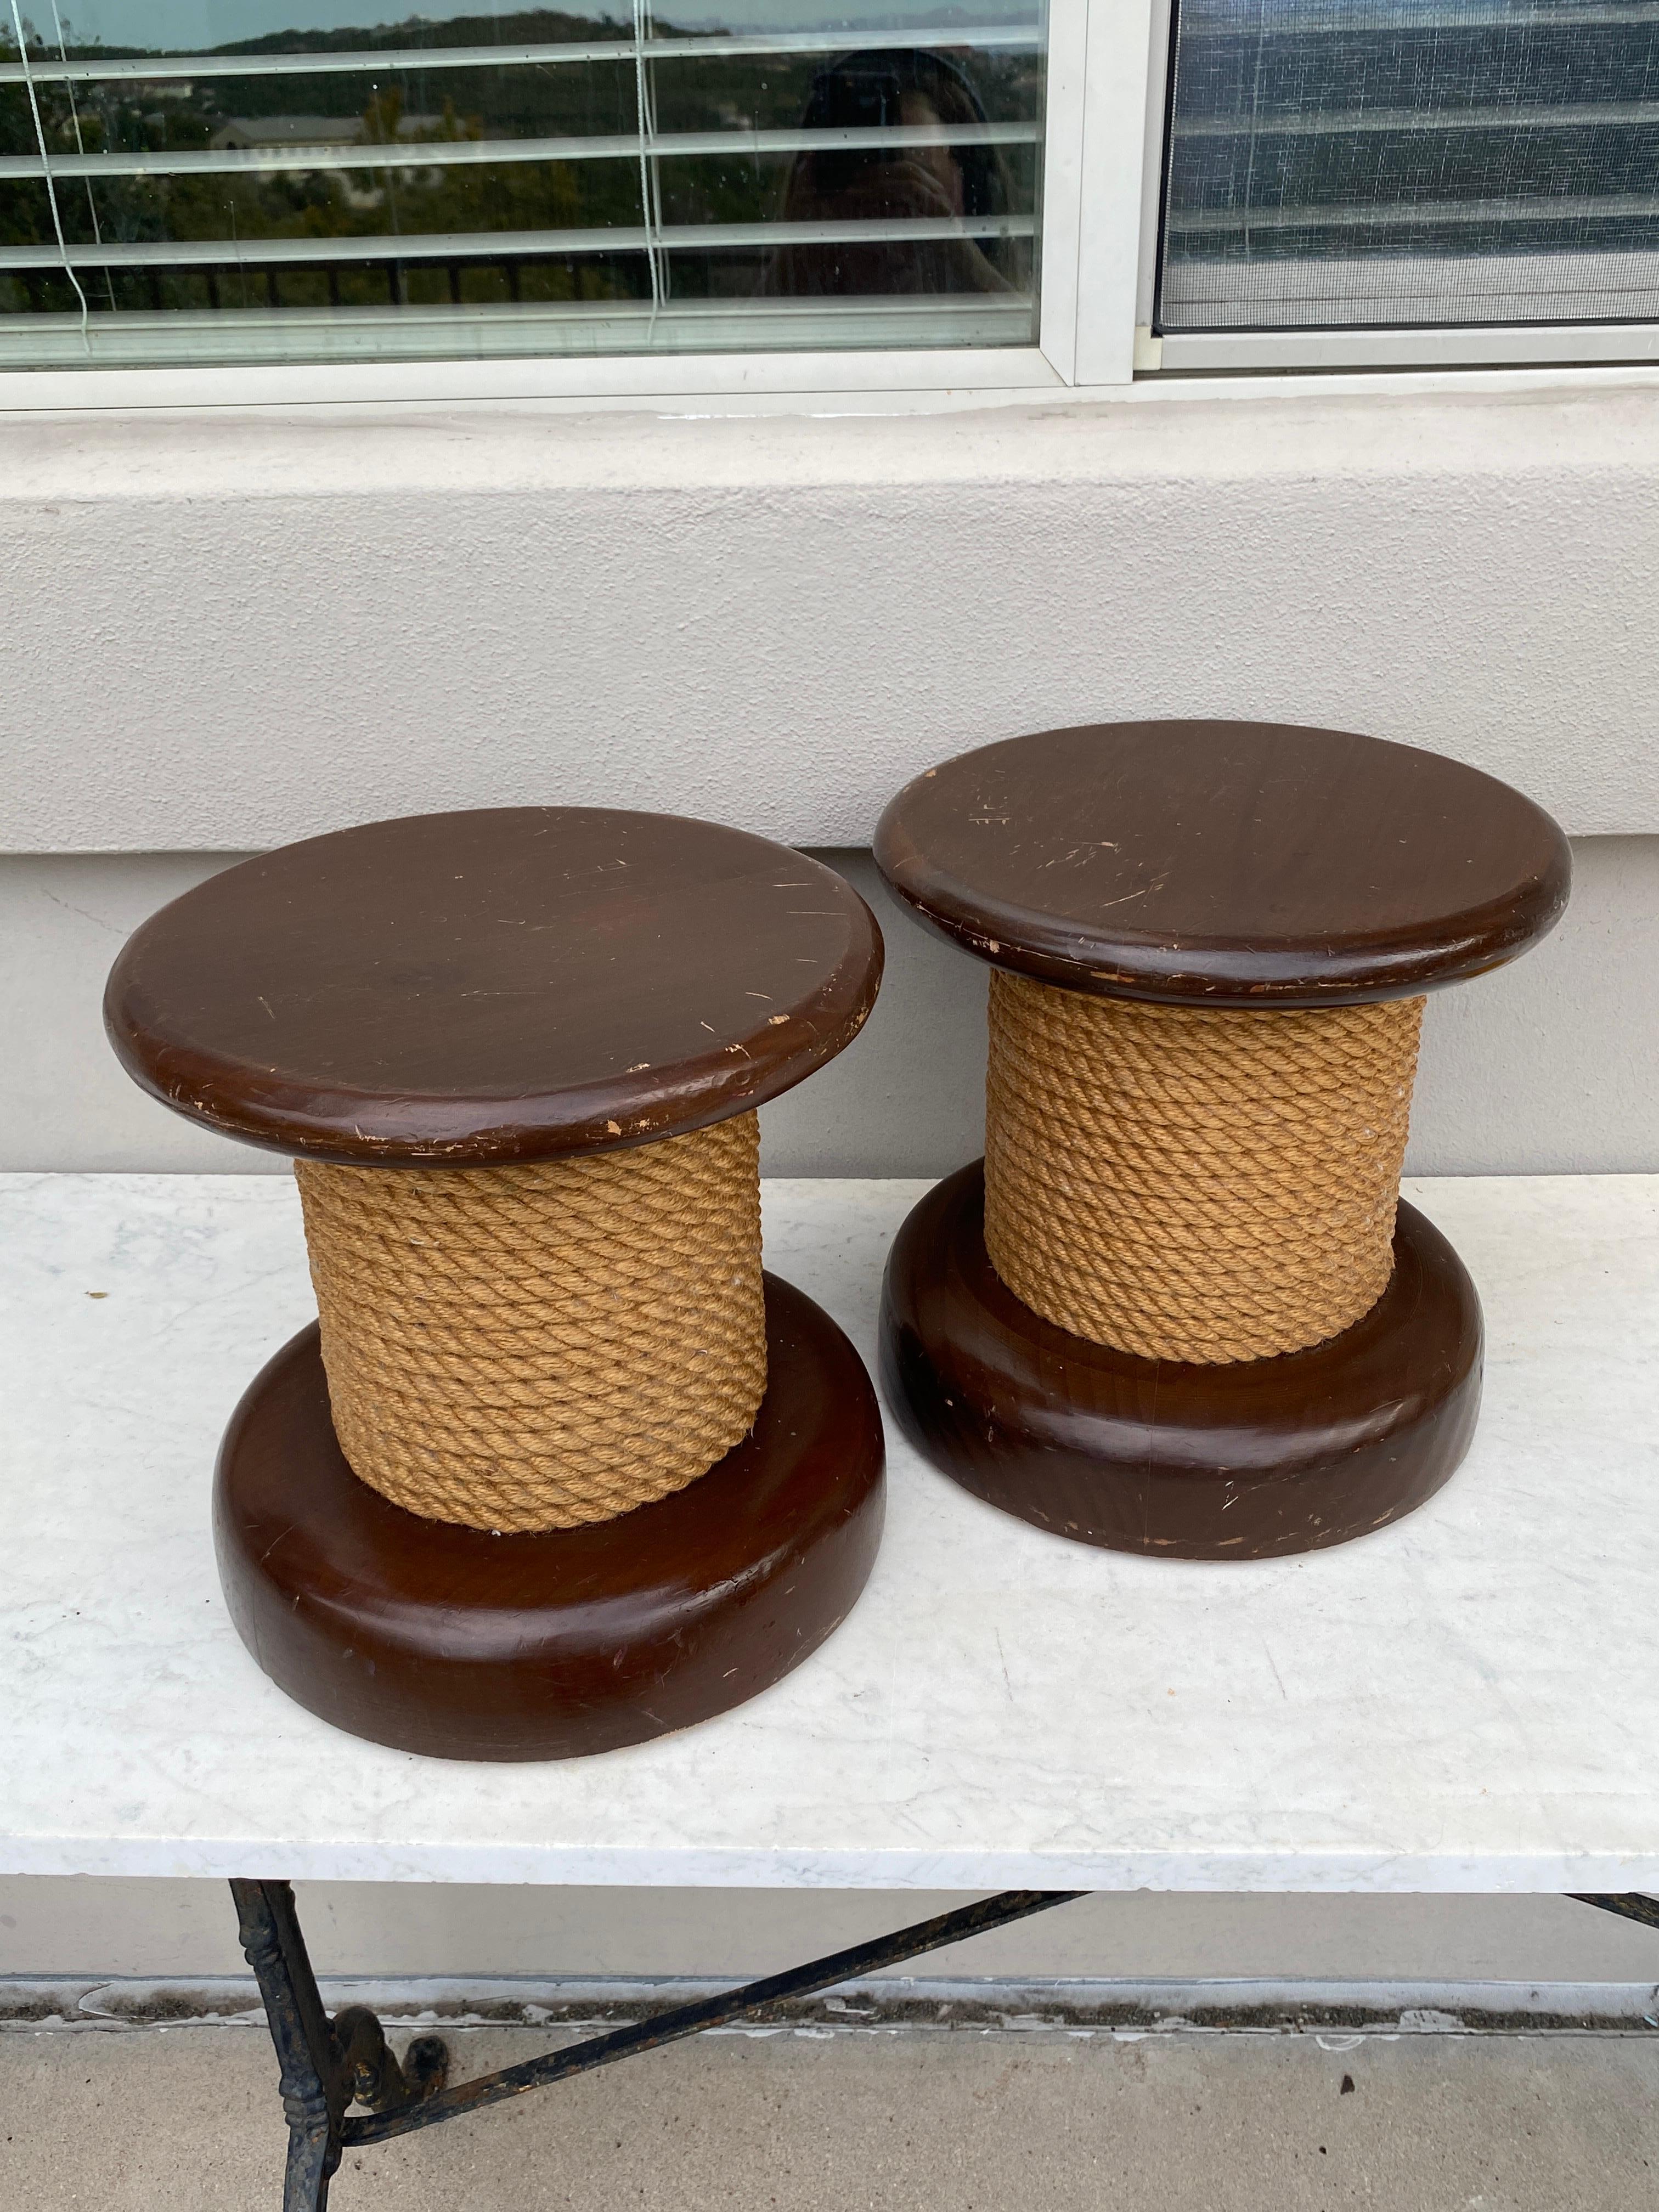 Pair of Audoux Minet rope stool with wood base.
Height / 10.2inches.
Diameter / 11 inches.